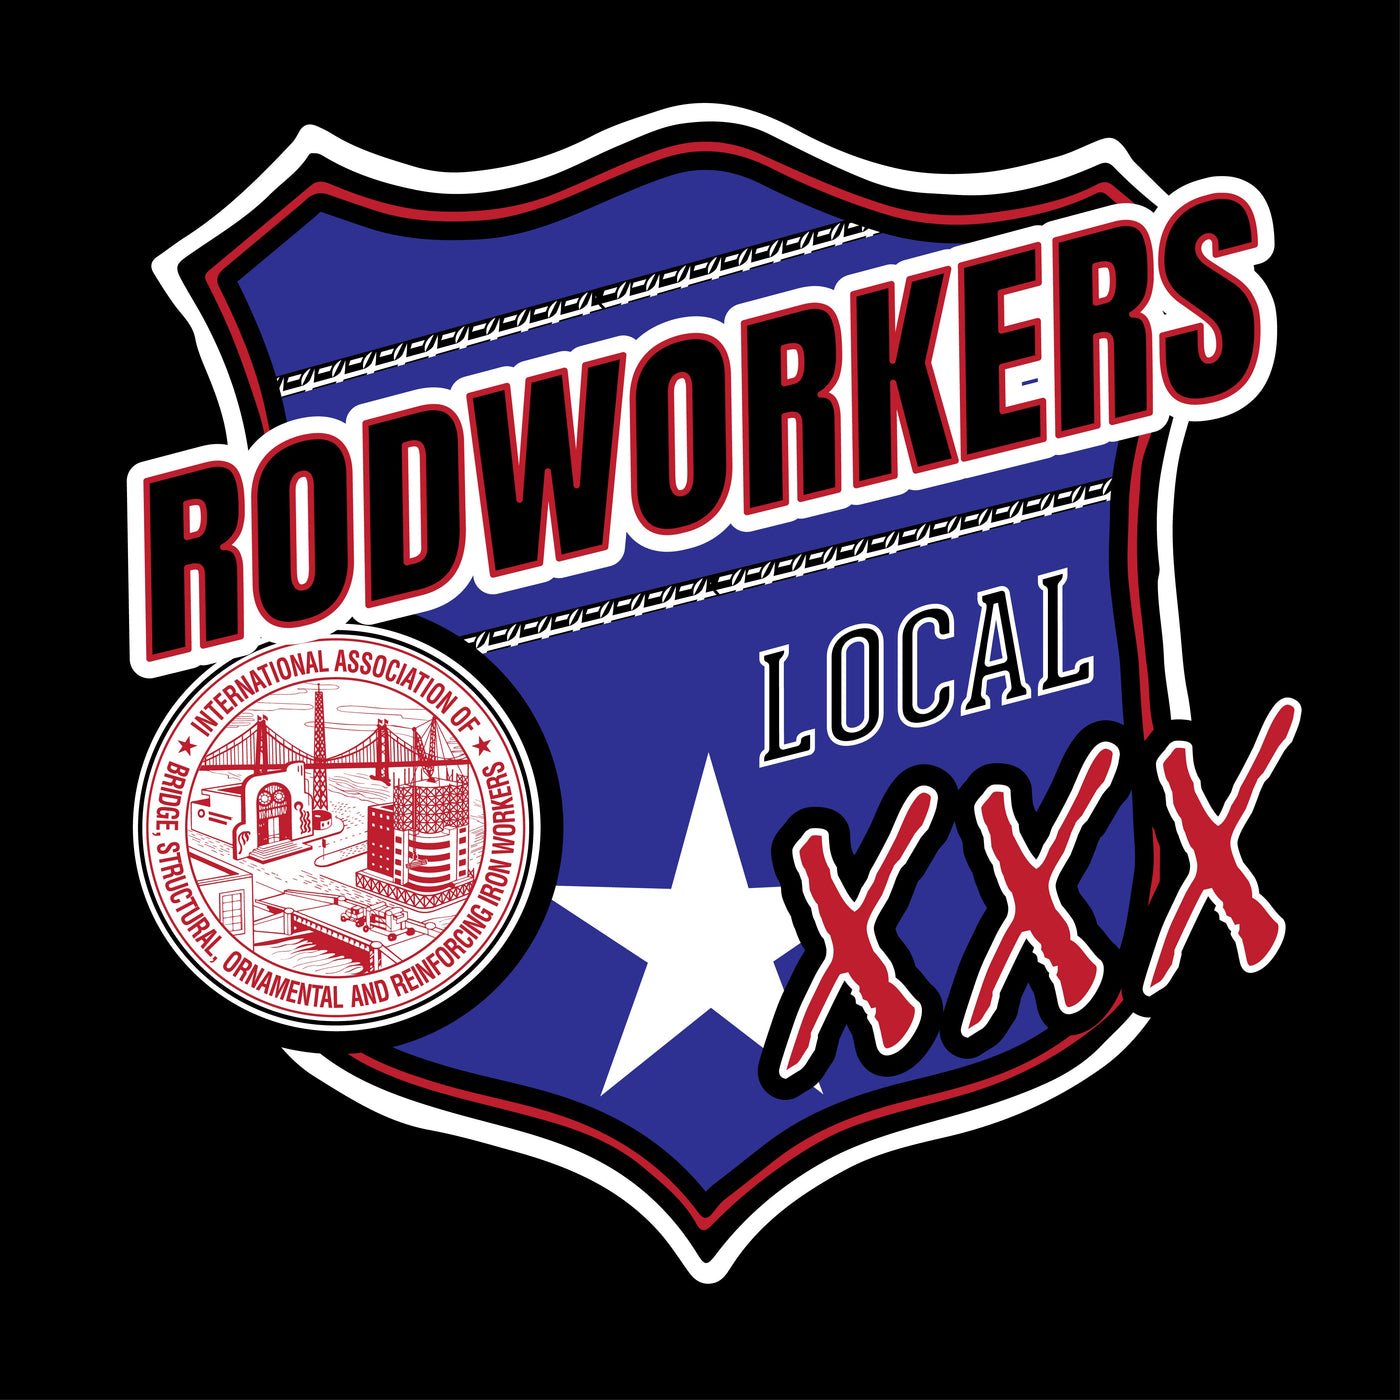 Rodworkers Shield USA